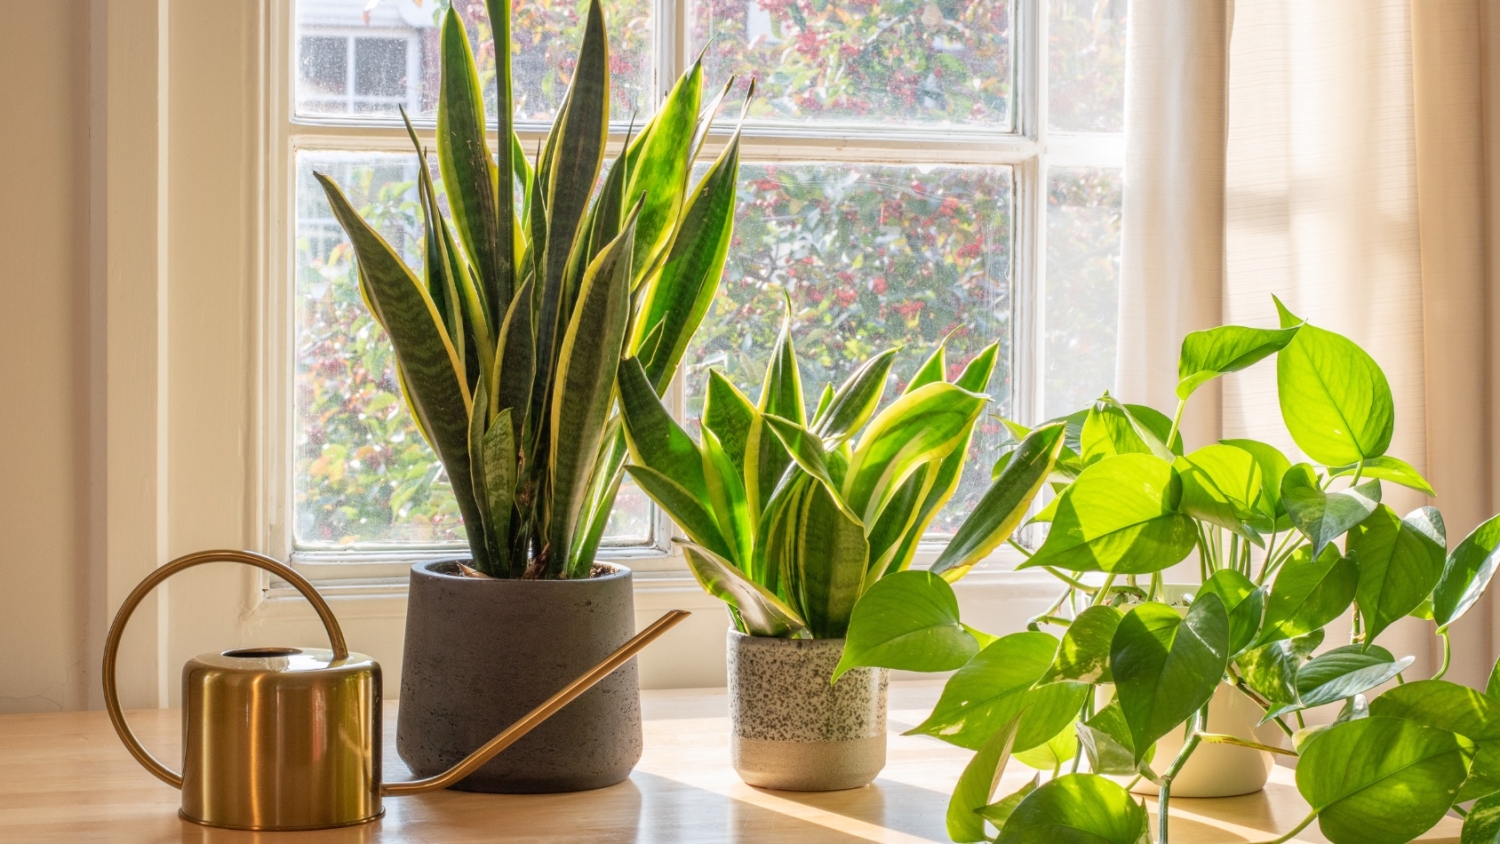 Houseplants and a watering can on a windowsill